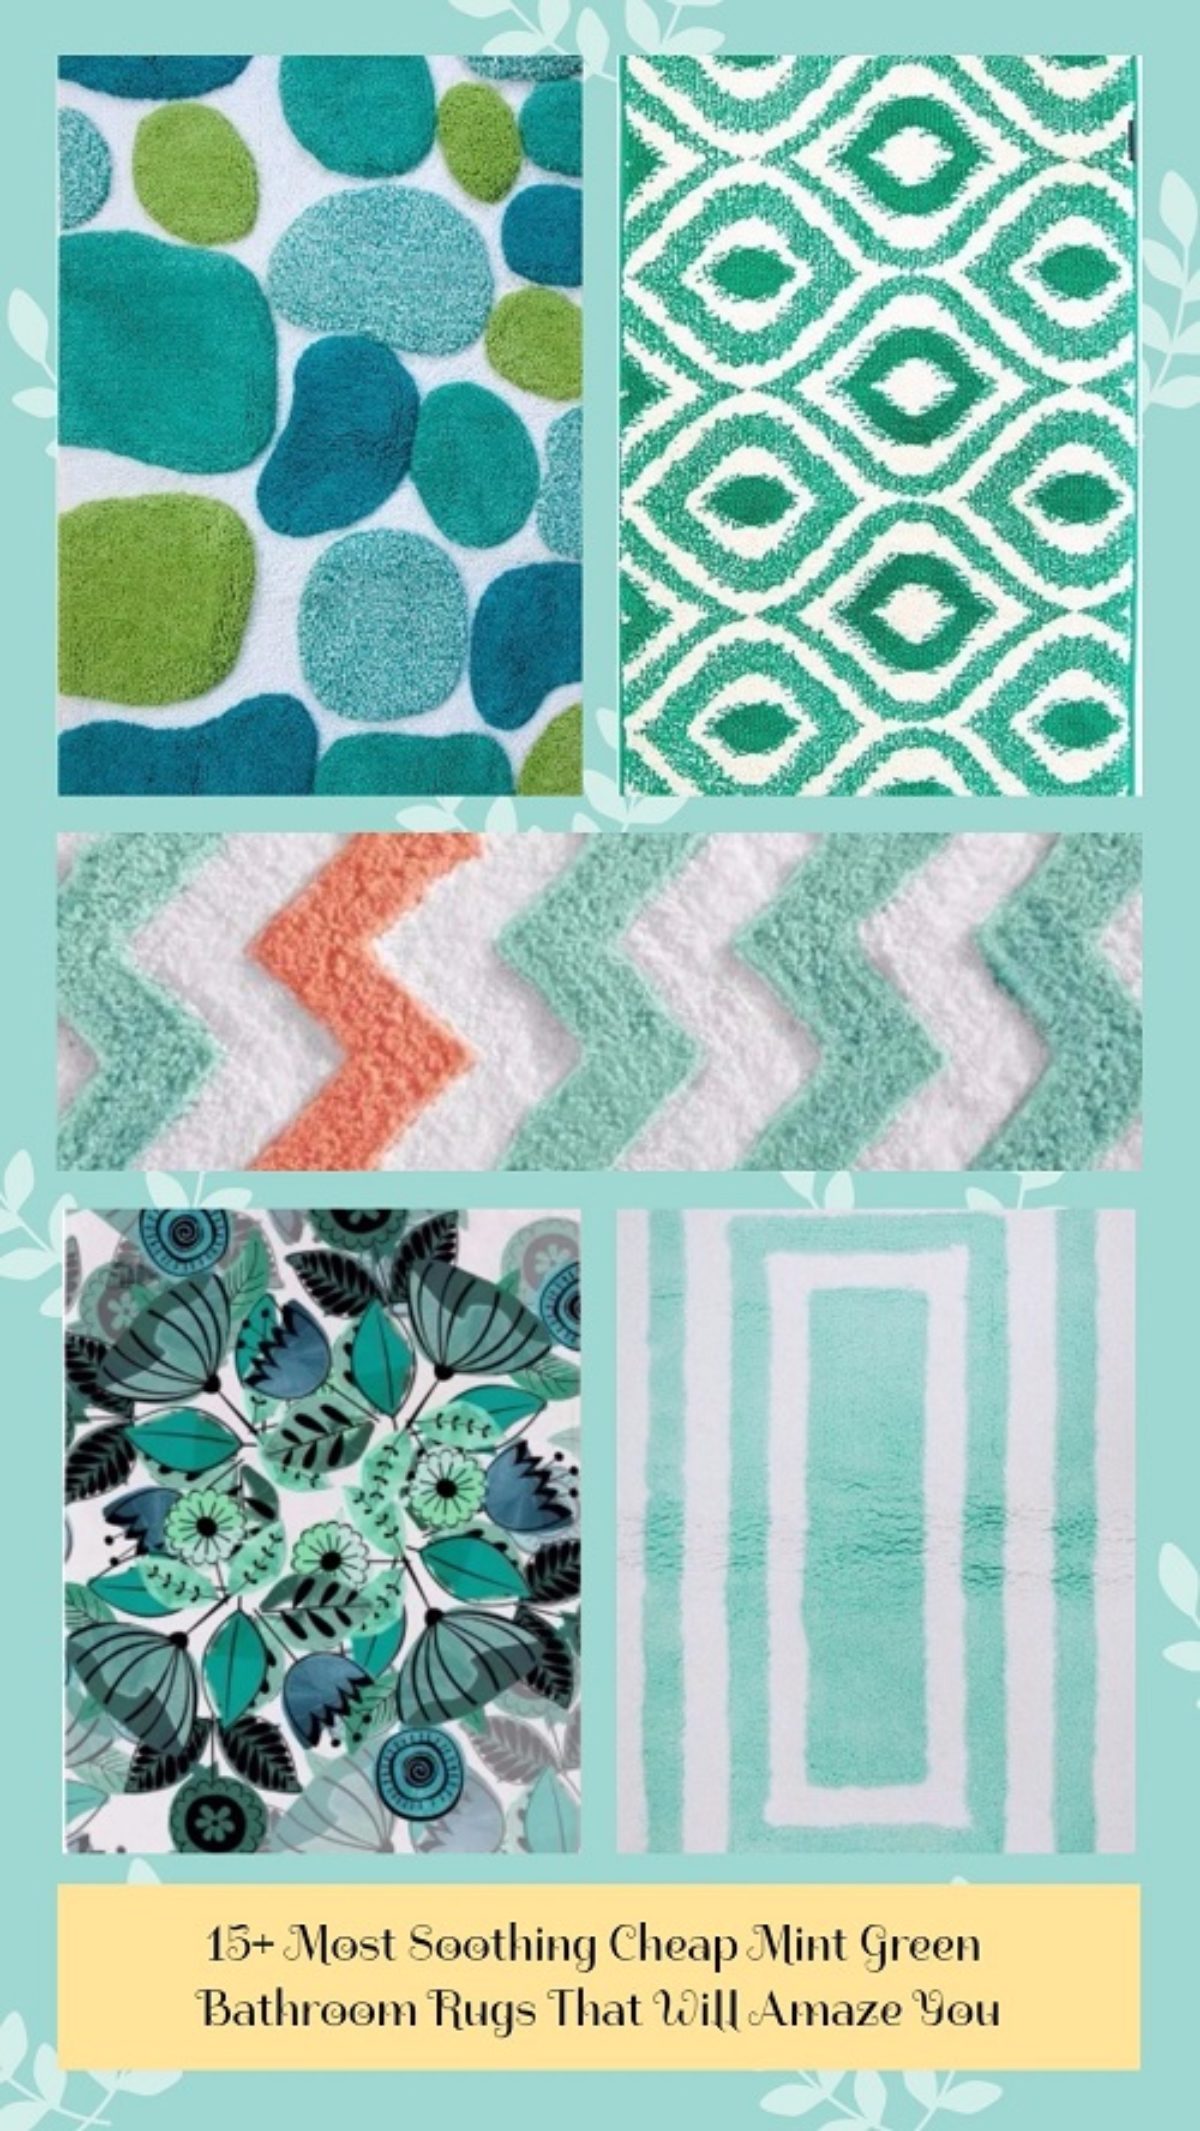 Soothing Mint Green Bathroom Rugs, Colorful Bath Rugs